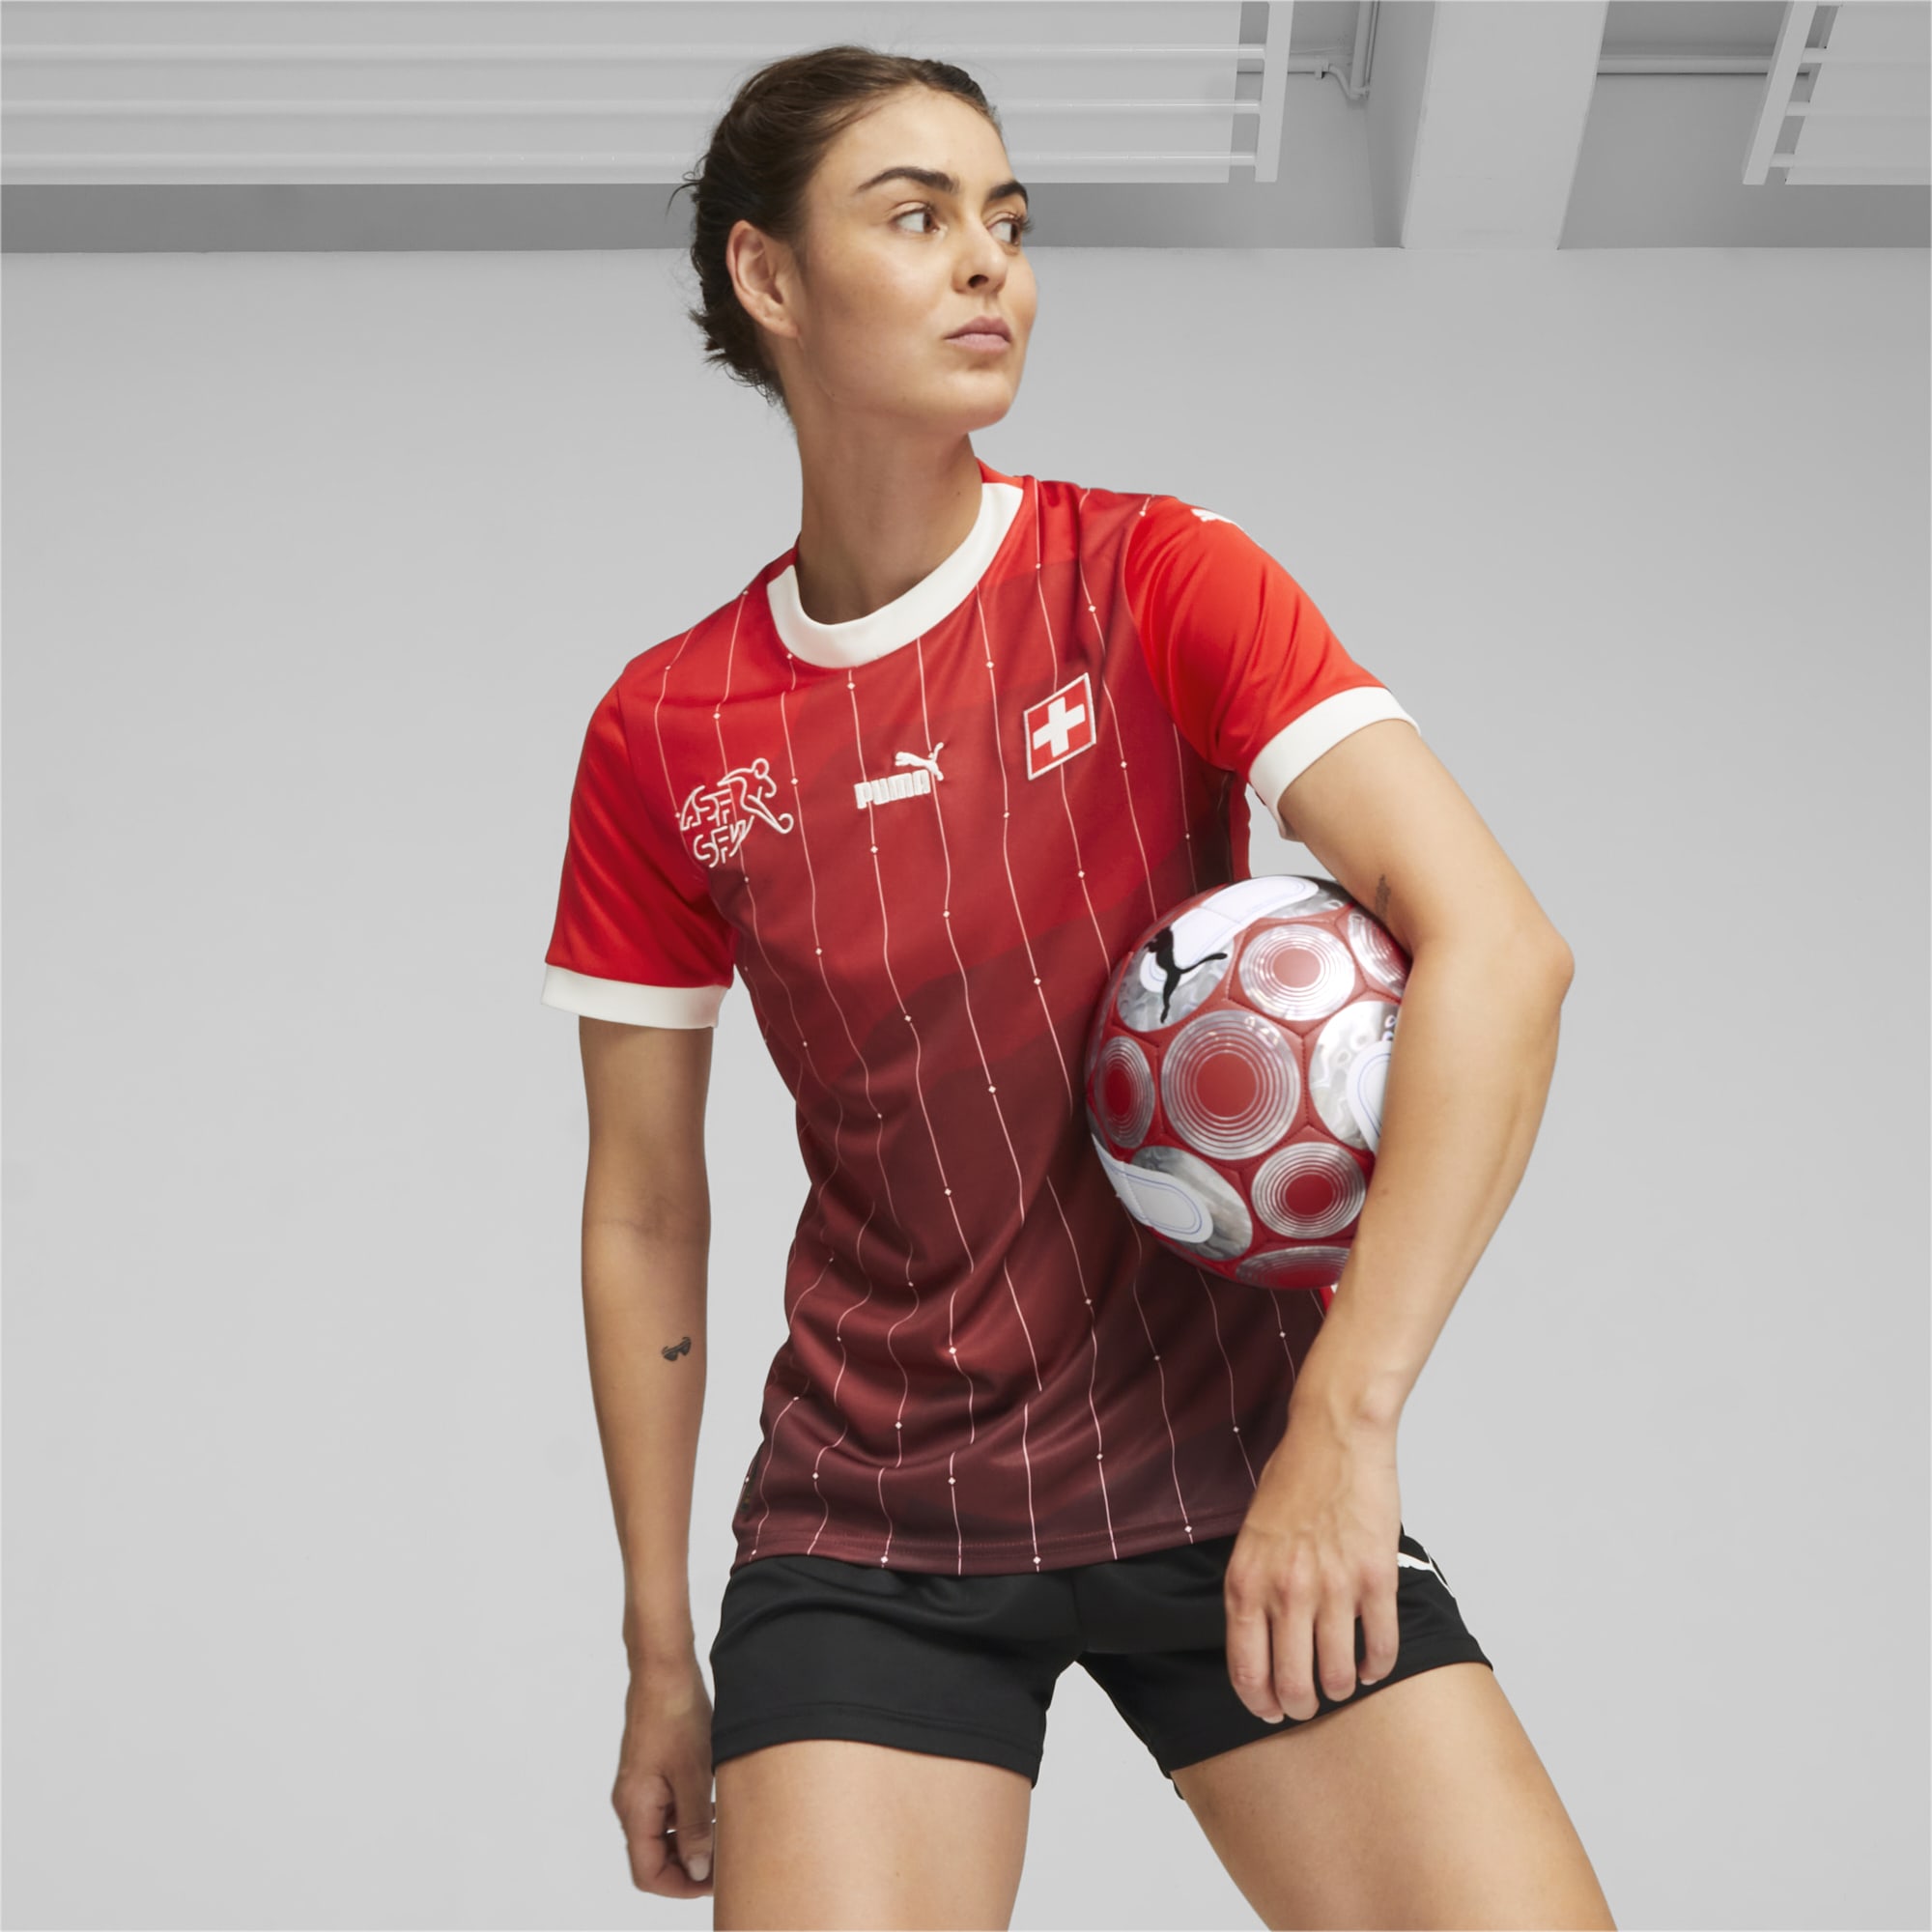 PUMA Switzerland 23/24 Women's World Cup Home Jersey, Red/White, Size XL, Clothing